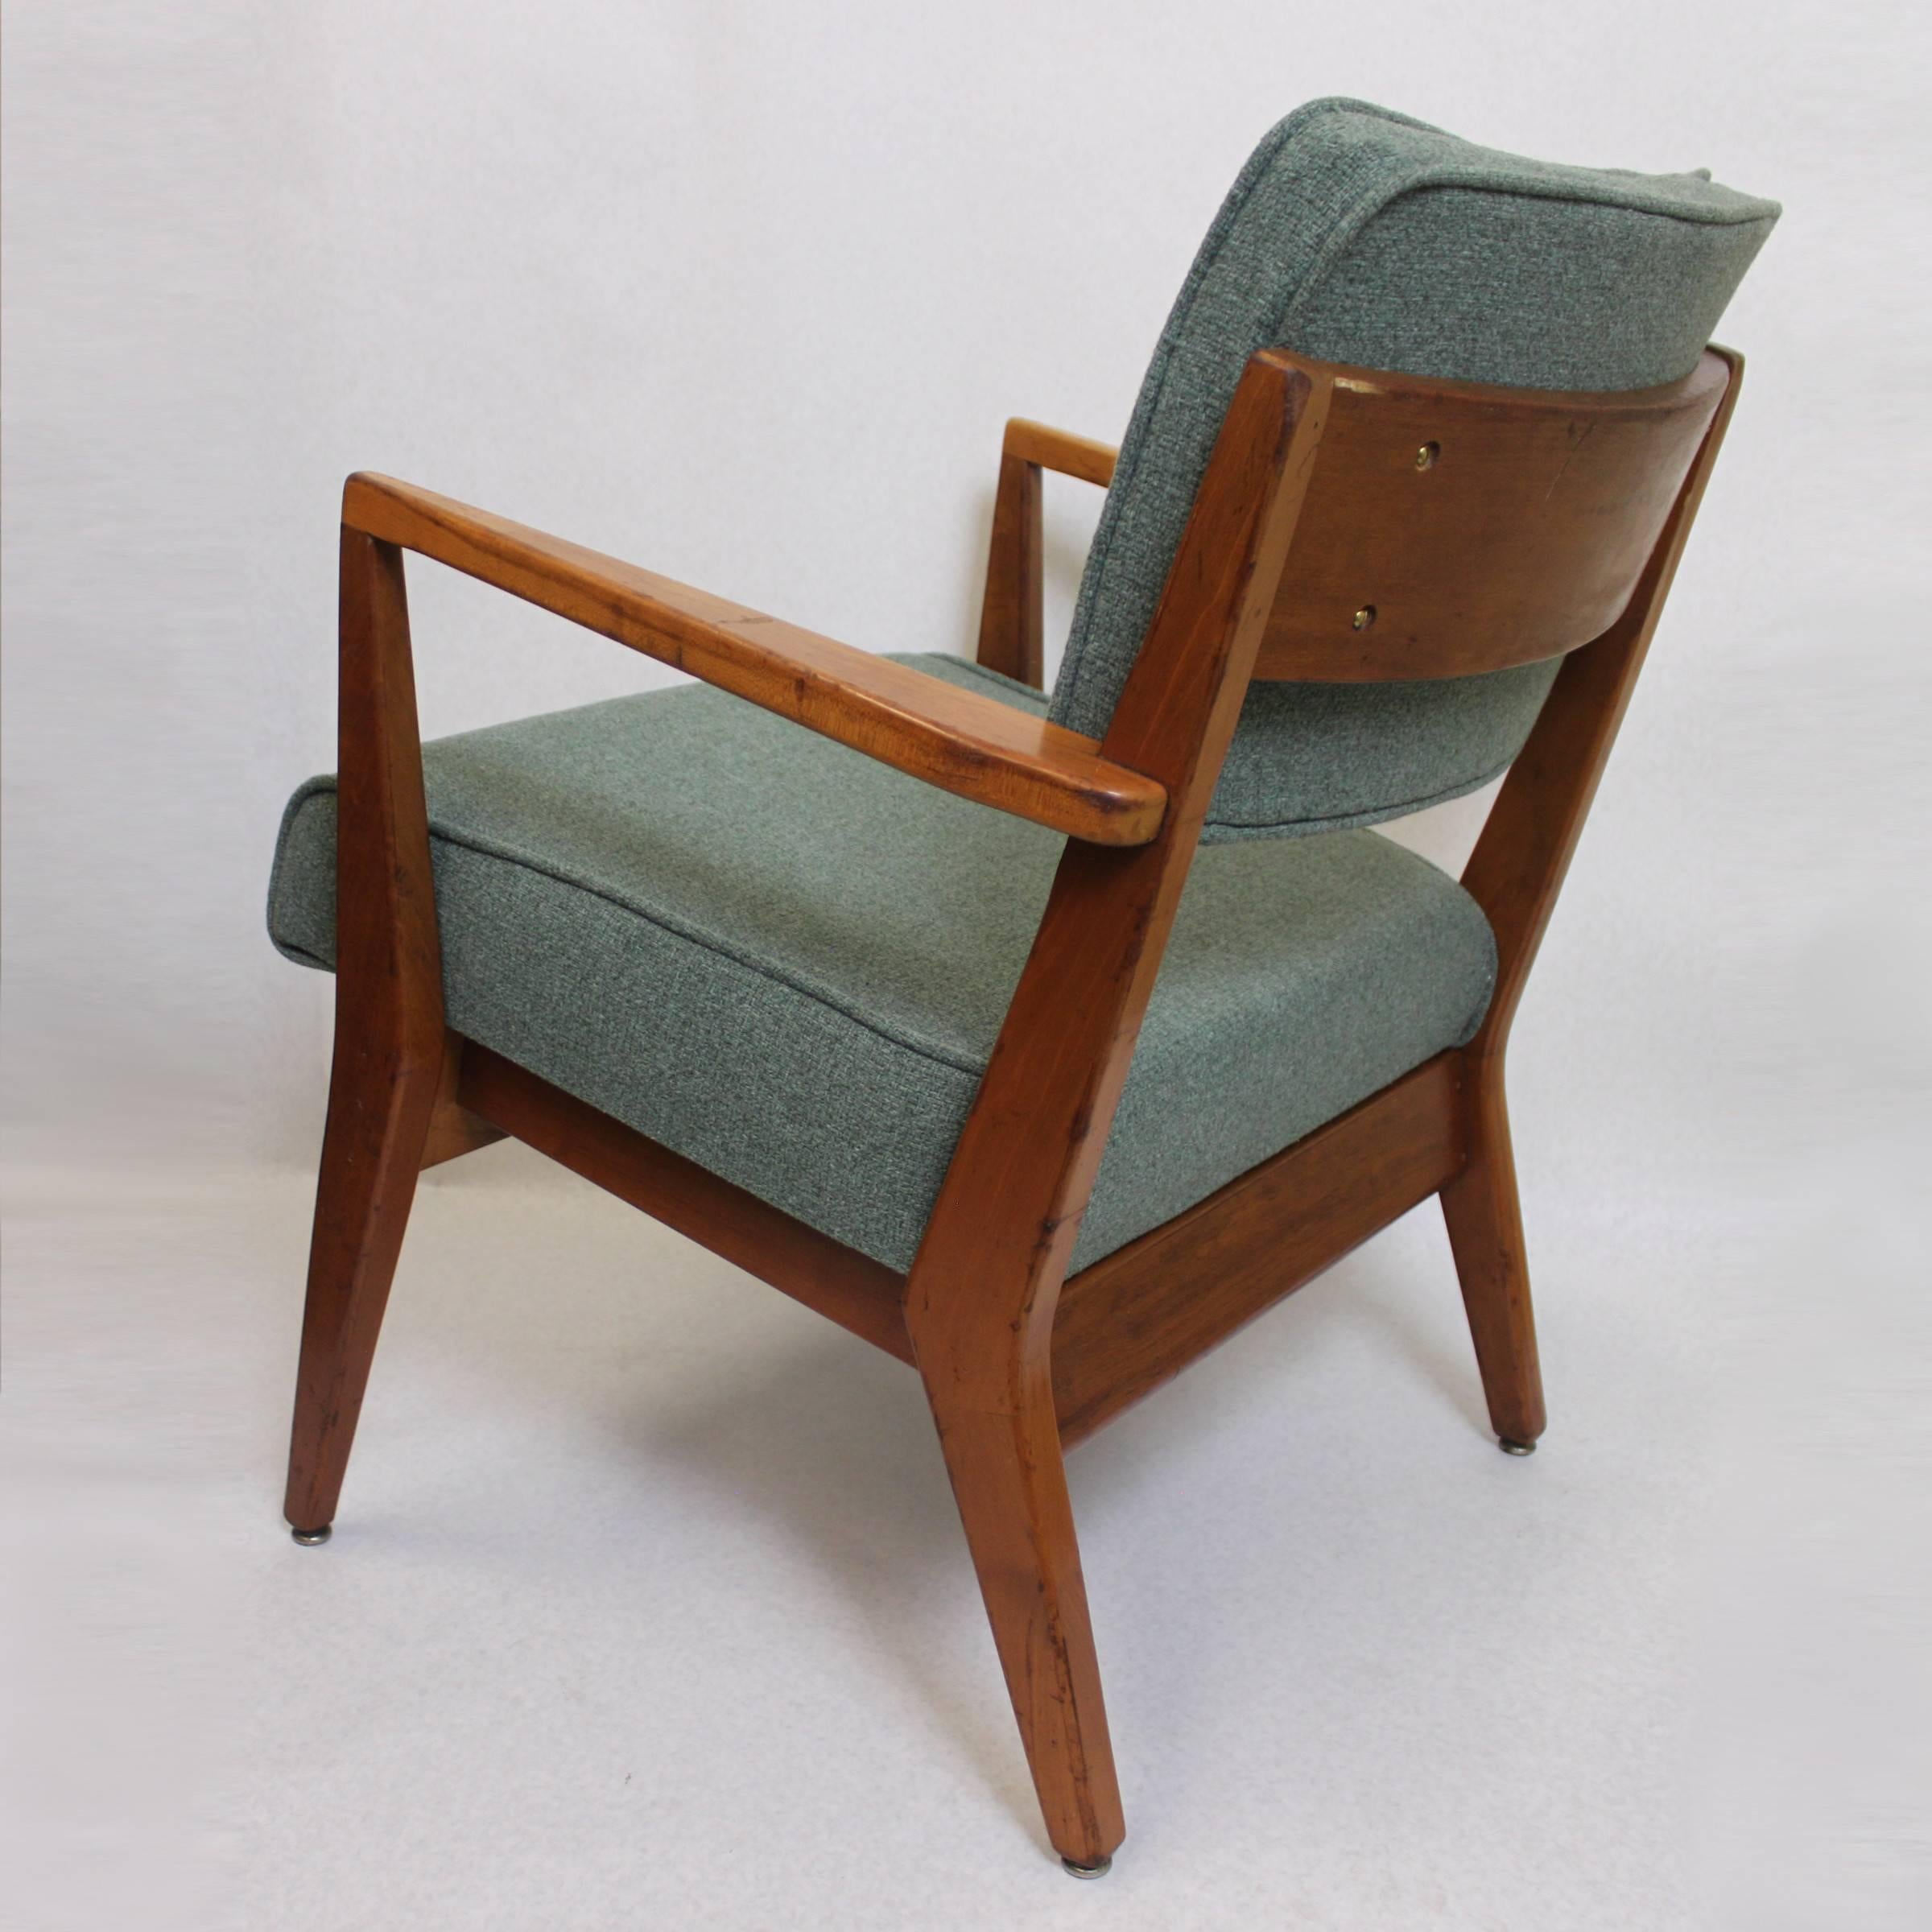 American Vintage 1950s Mid-Century Modern Cherry Lounge Side Chair